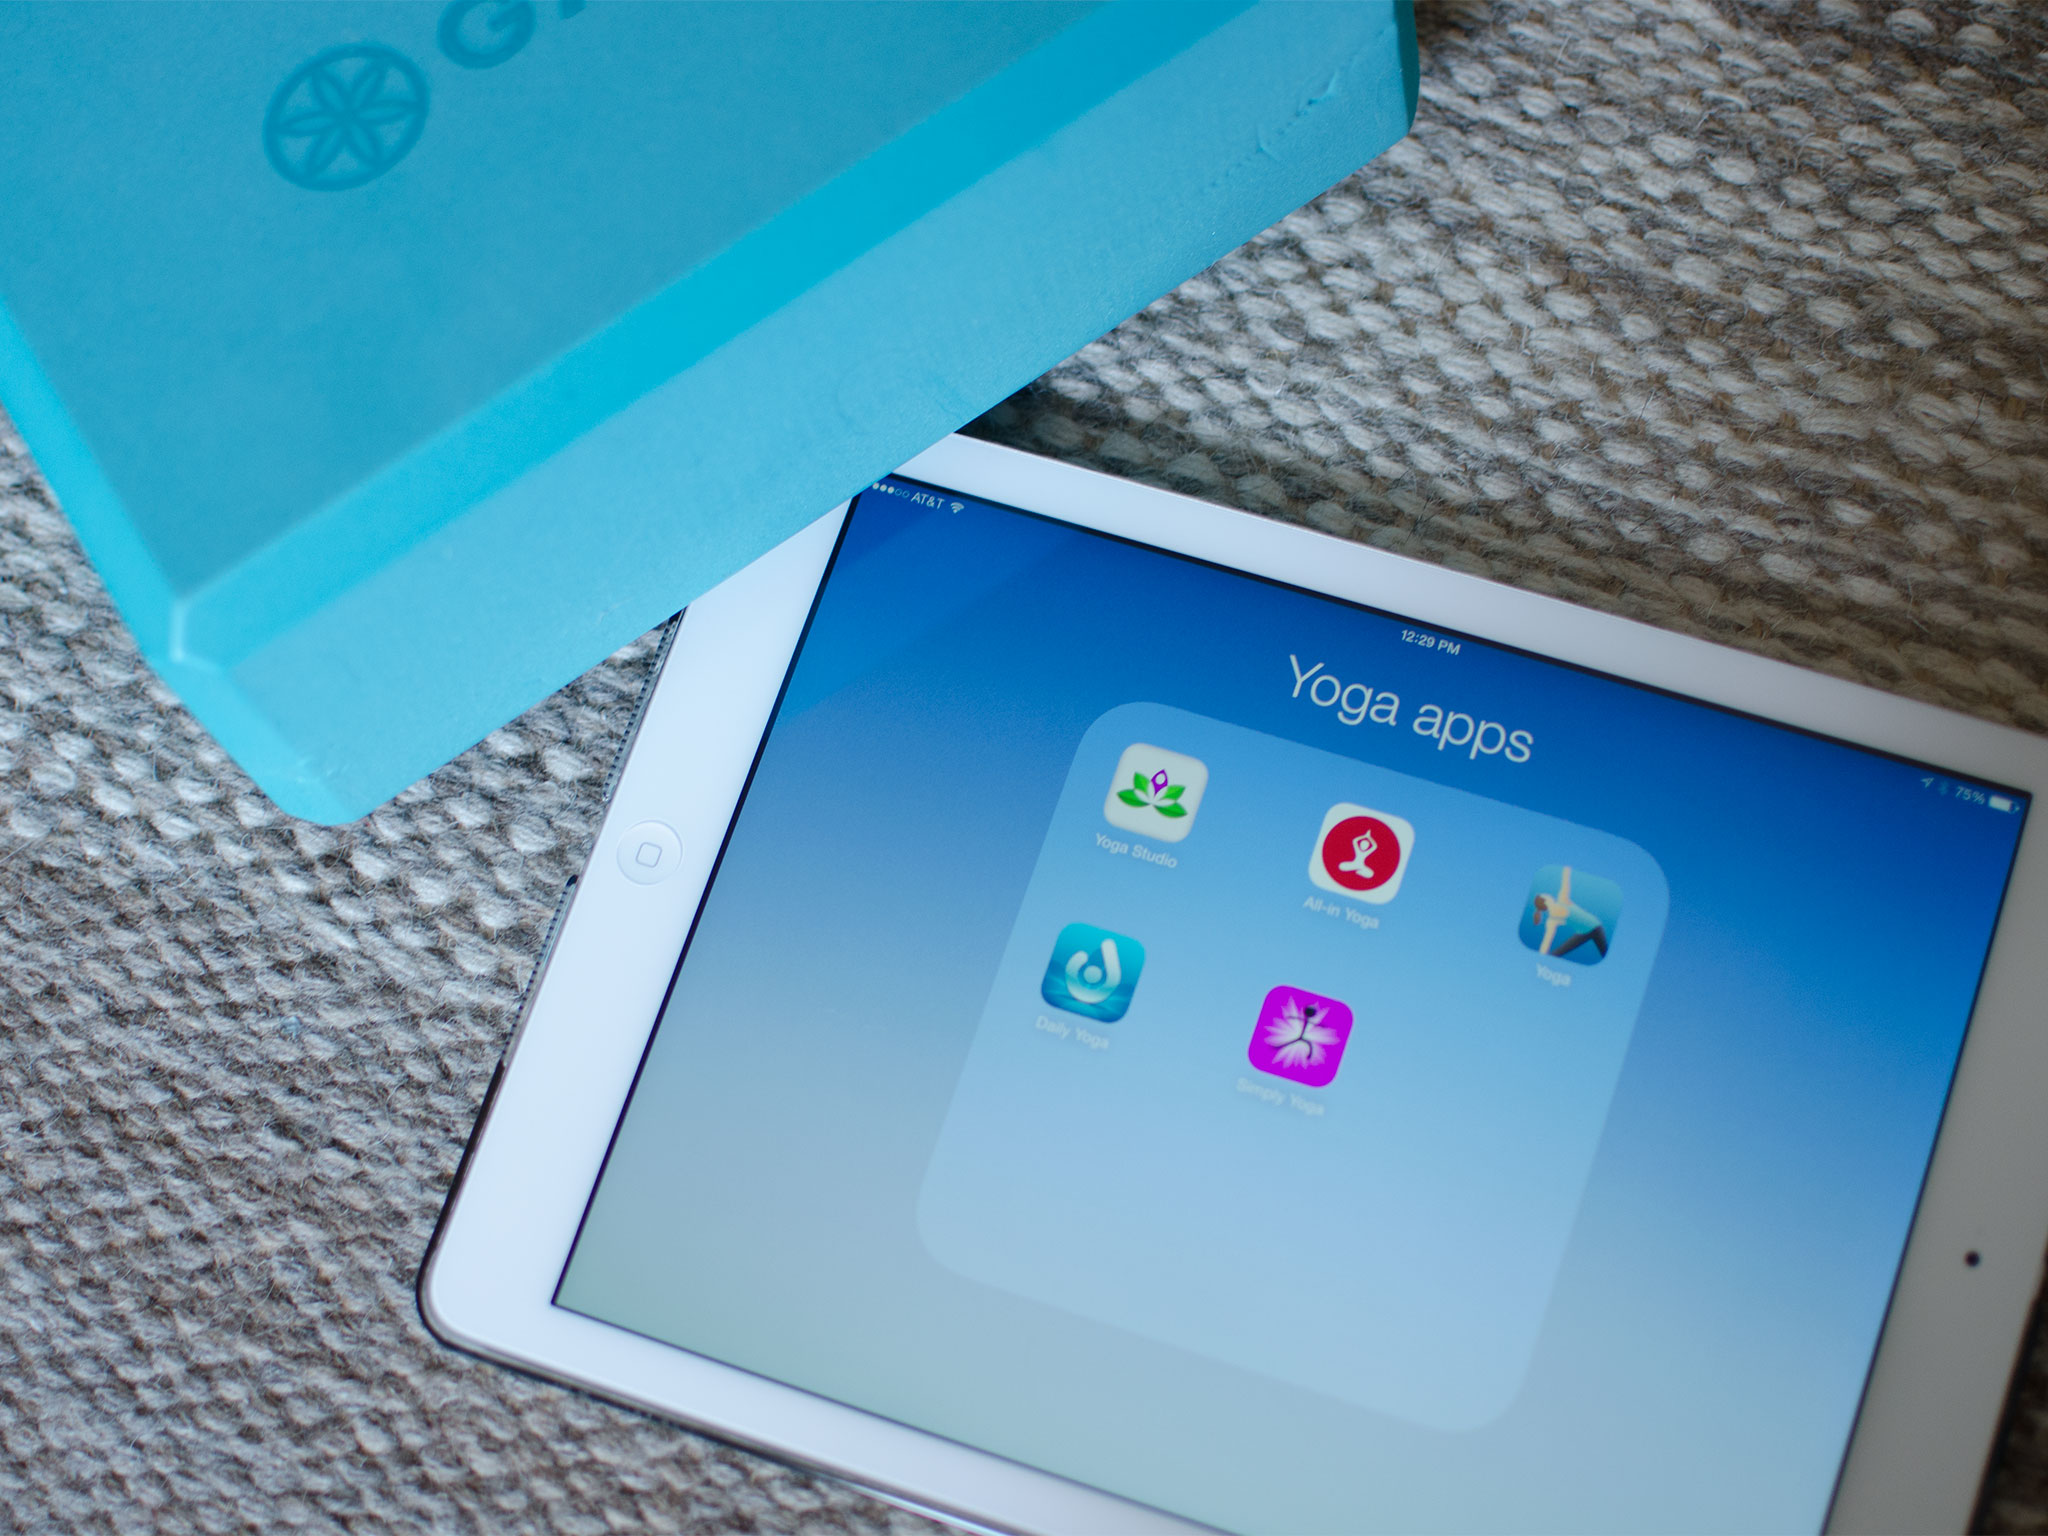 Best yoga apps for iPad: Pocket Yoga, Yoga Studio, Daily Yoga, and more!